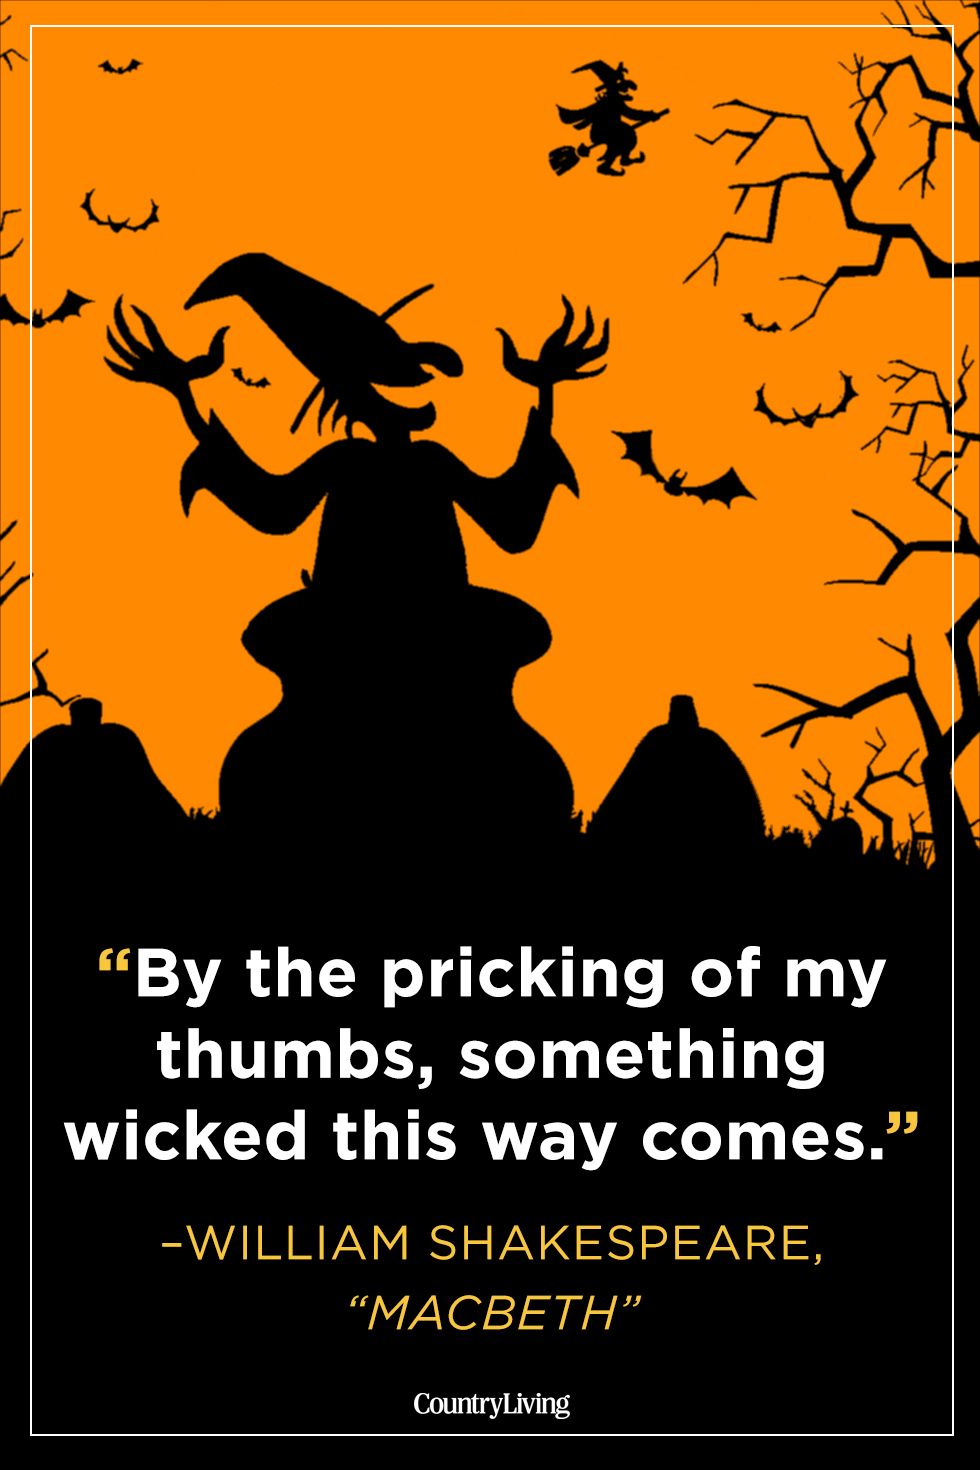 Shakespeare Witch Quotes - KibrisPDR